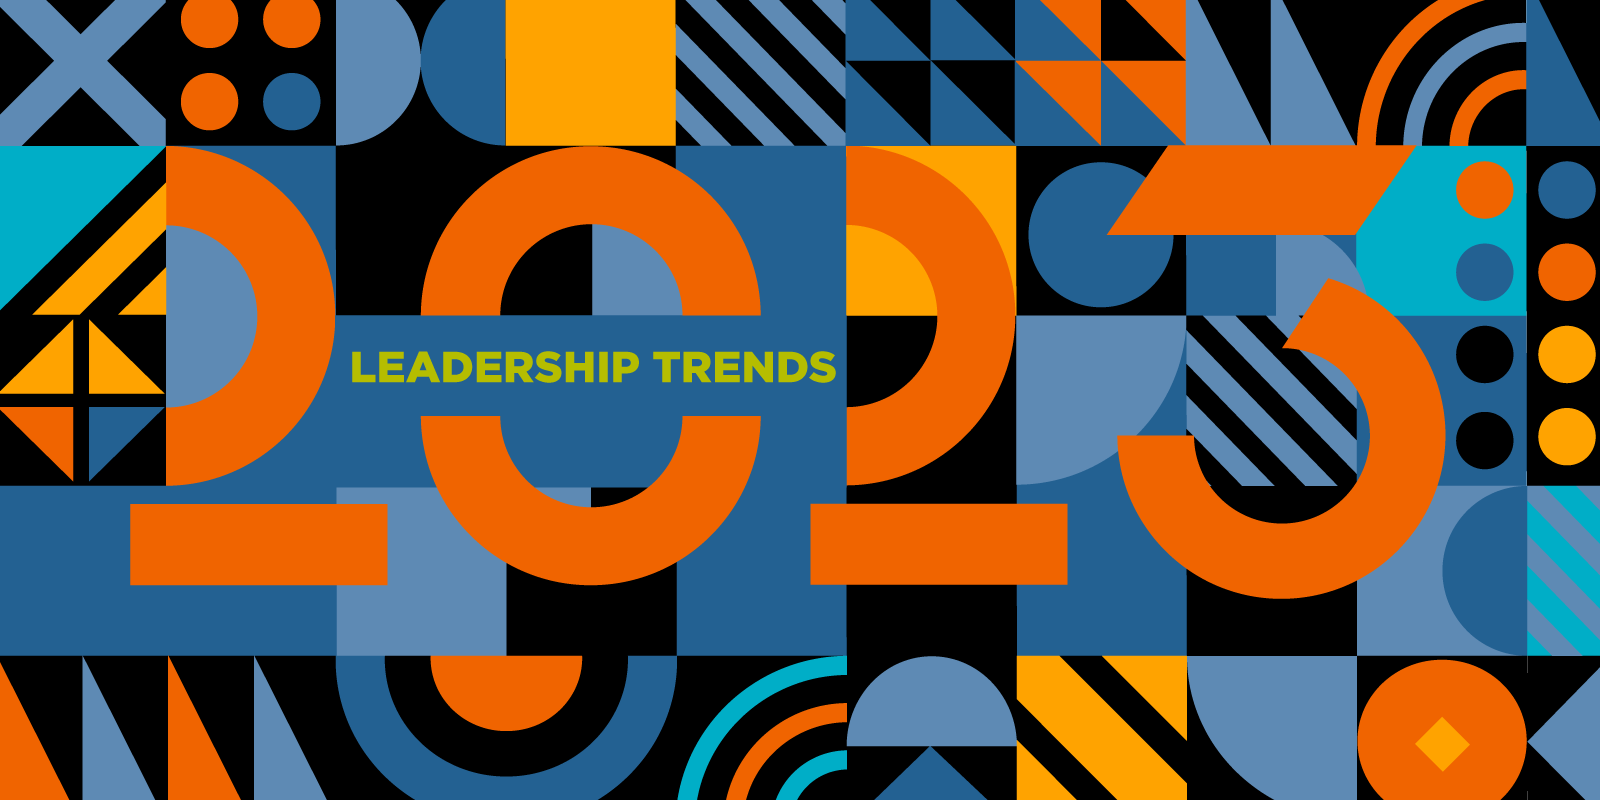 Learn the key leadership trends for 2023. DDI